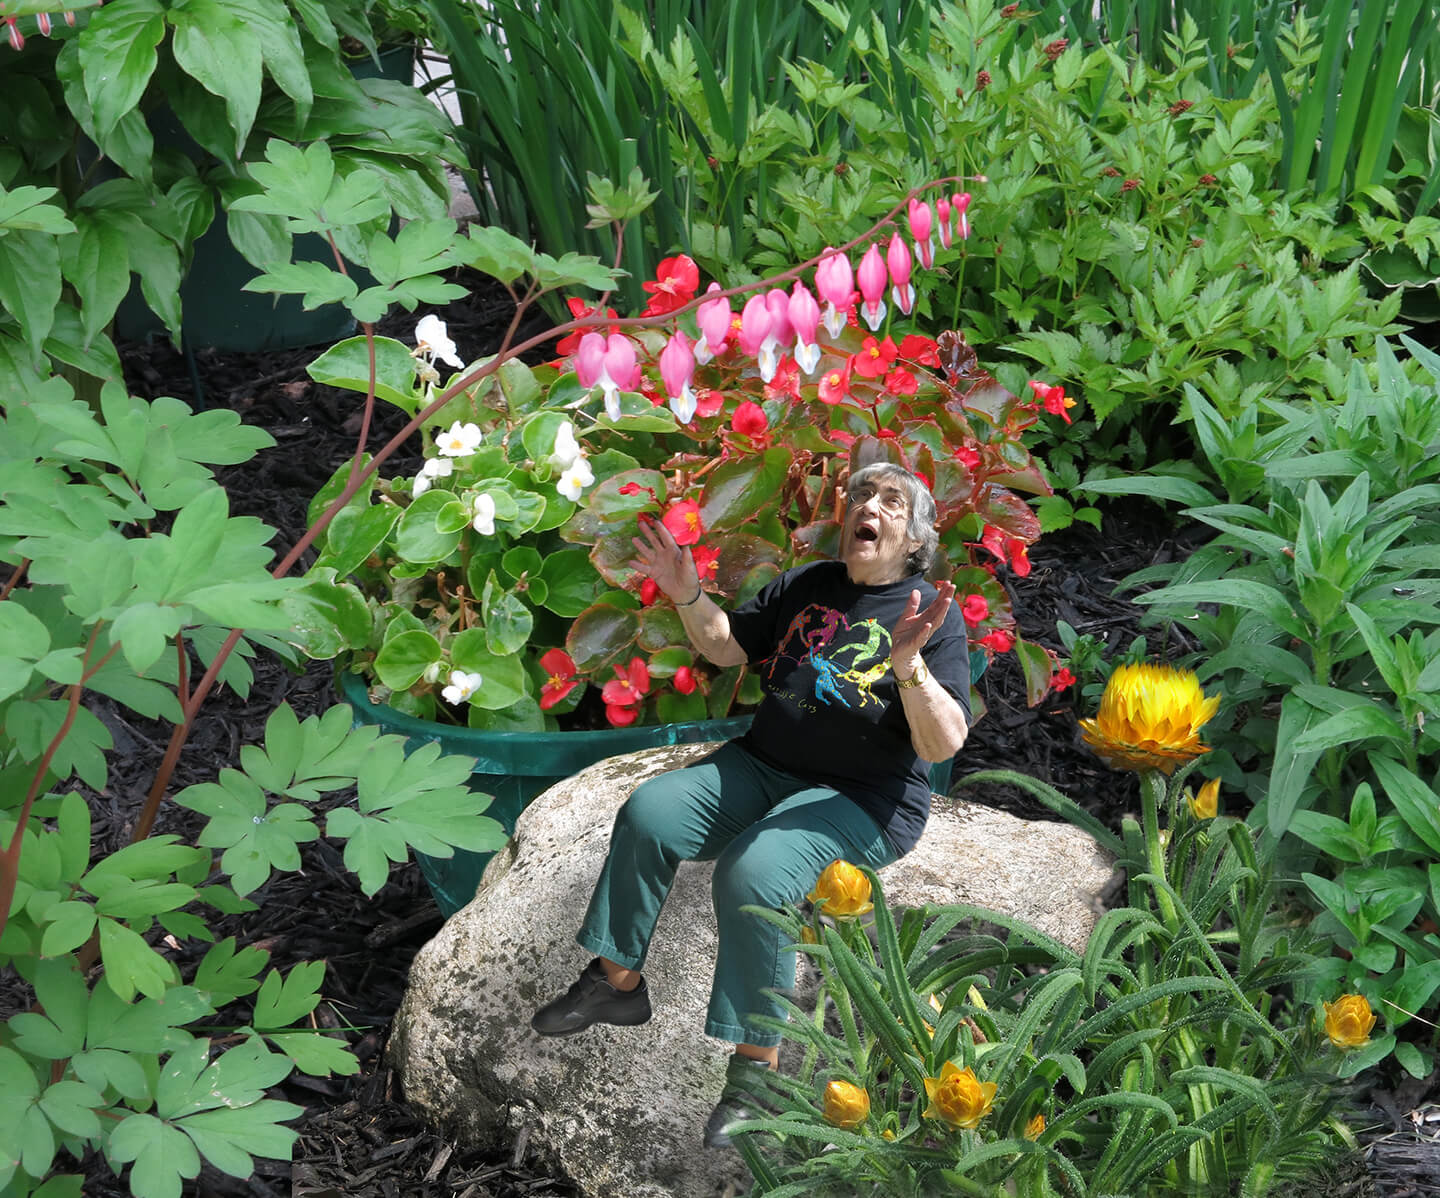 "I want to be tiny in my garden, sitting on the rocks," Robin Botie's friend in Ithaca, New York had told her. So she photoshopped her tiny, in her garden.